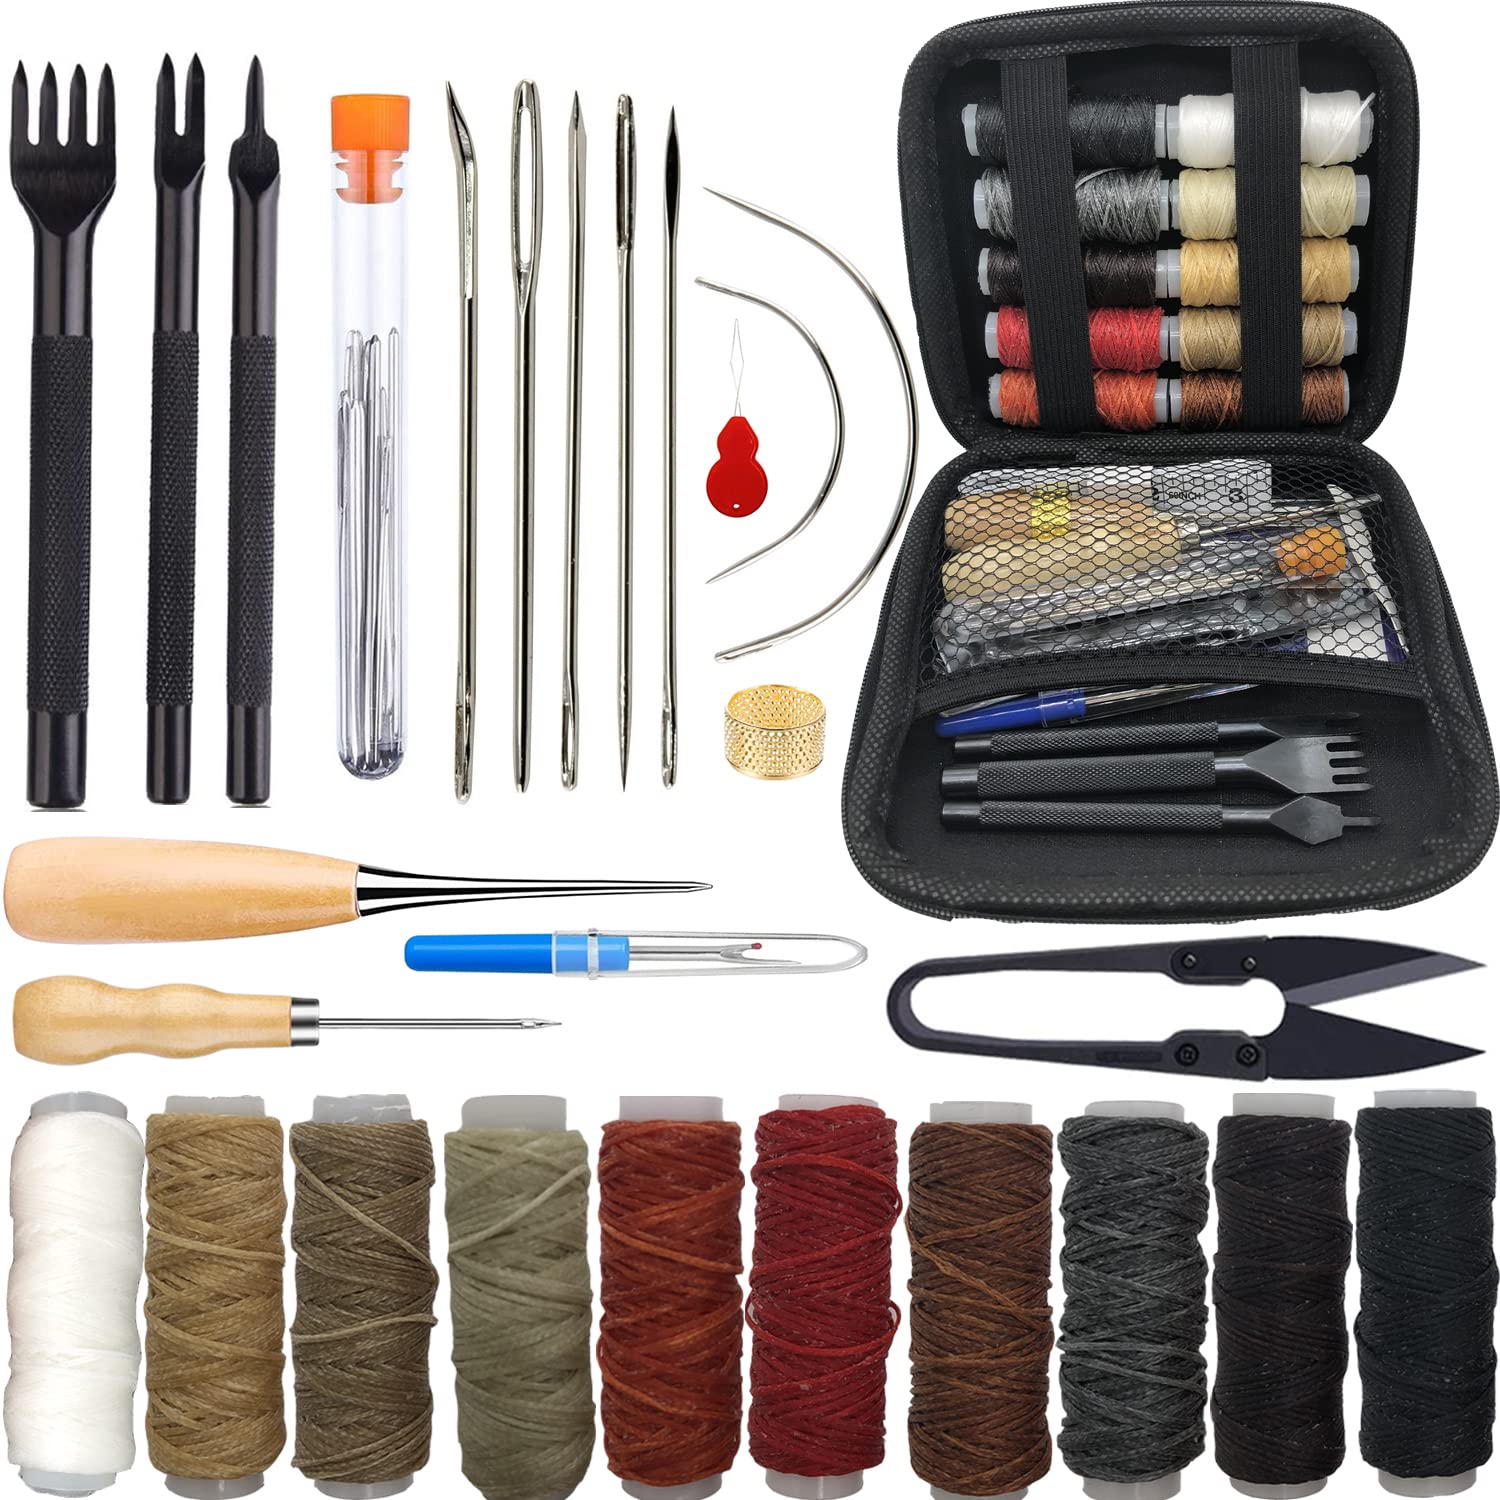 Artskills Leather Working Kit for Beginners with Leather Tools, Dyes, and Leather Stamps, Leather Crafting Kits for Adults & Teens, 64 PC